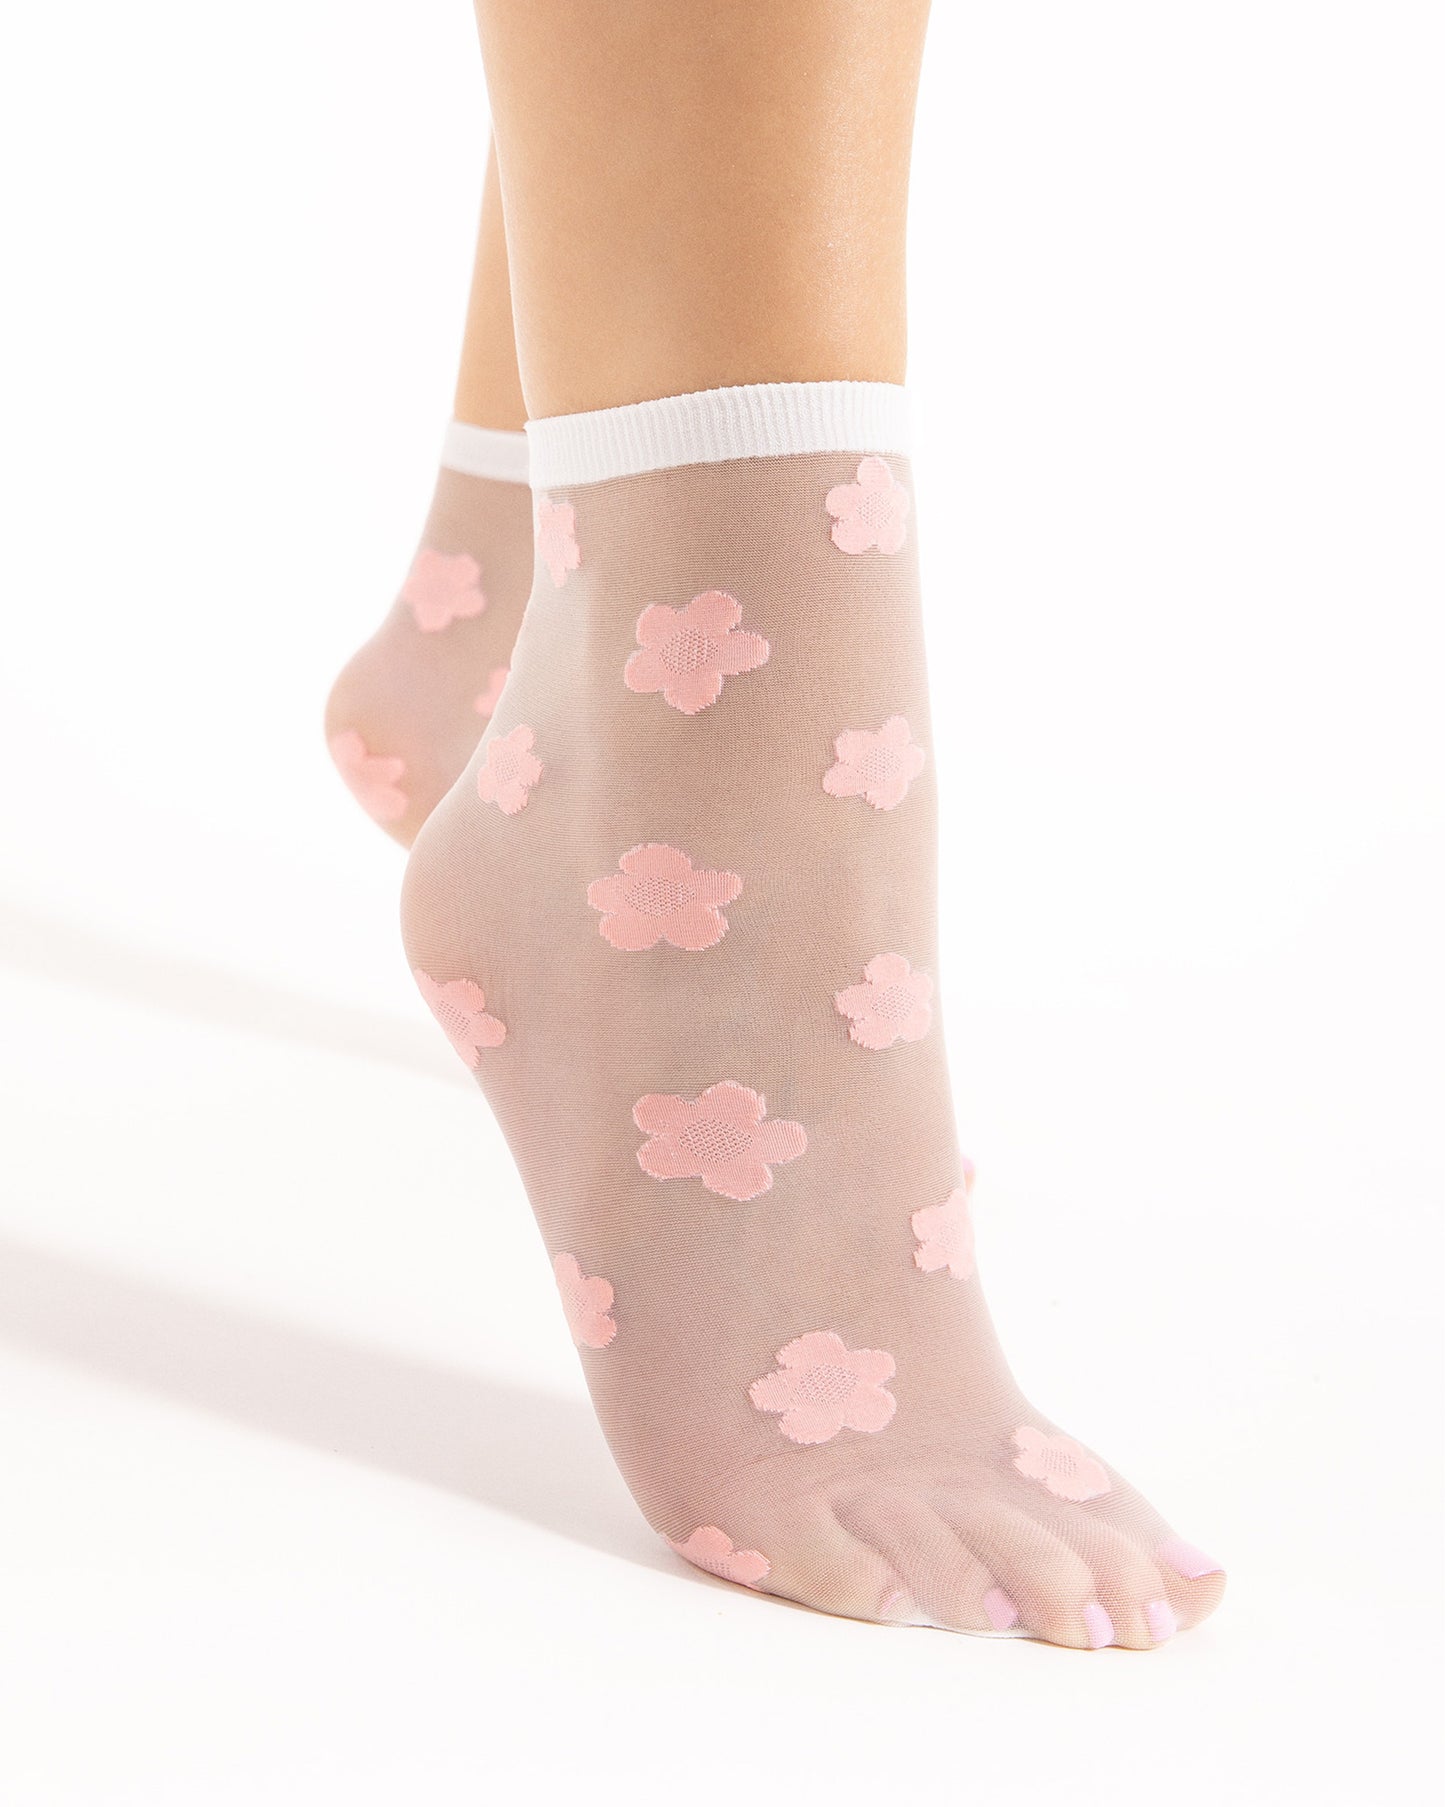 Fiore Jodie Socks - Sheer white fashion ankle socks with a pale pink floral daisy style pattern and plain thin cuff.